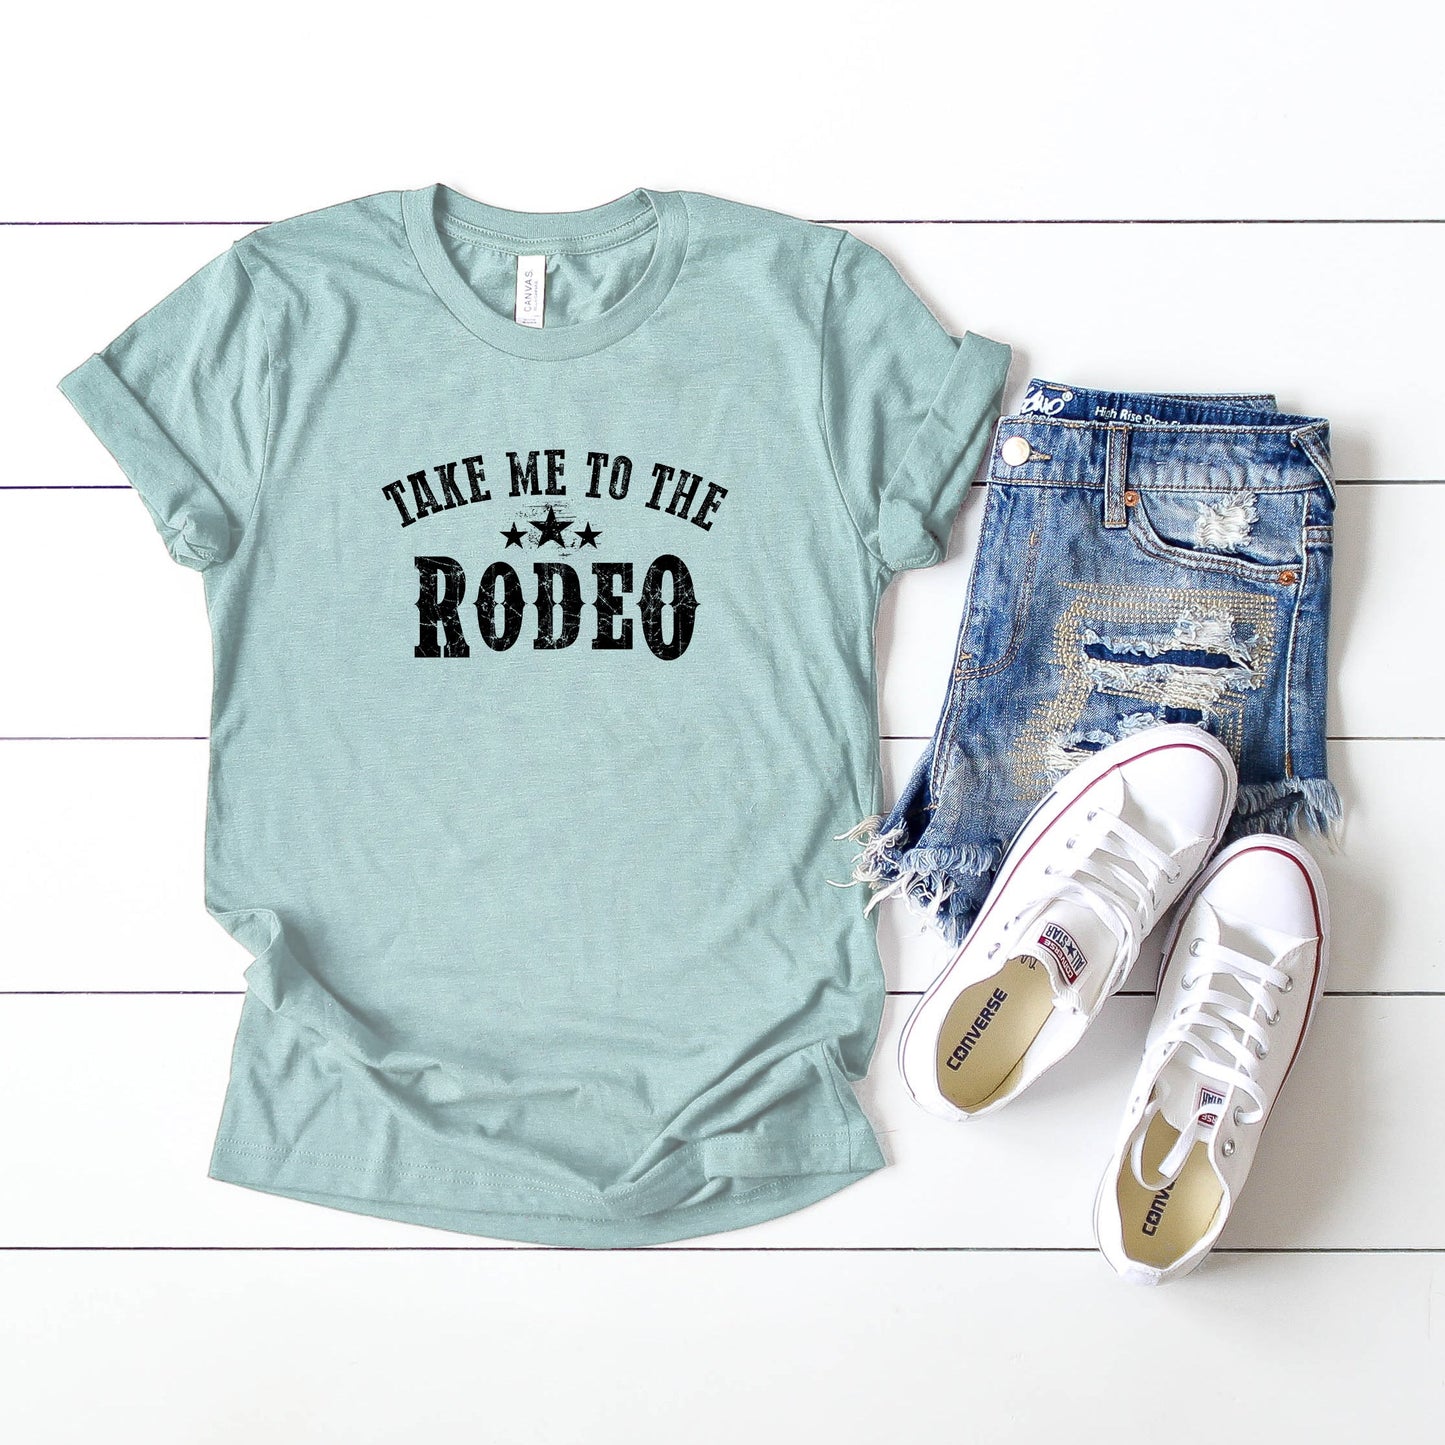 Take me to the Rodeo | Short Sleeve Crew Neck